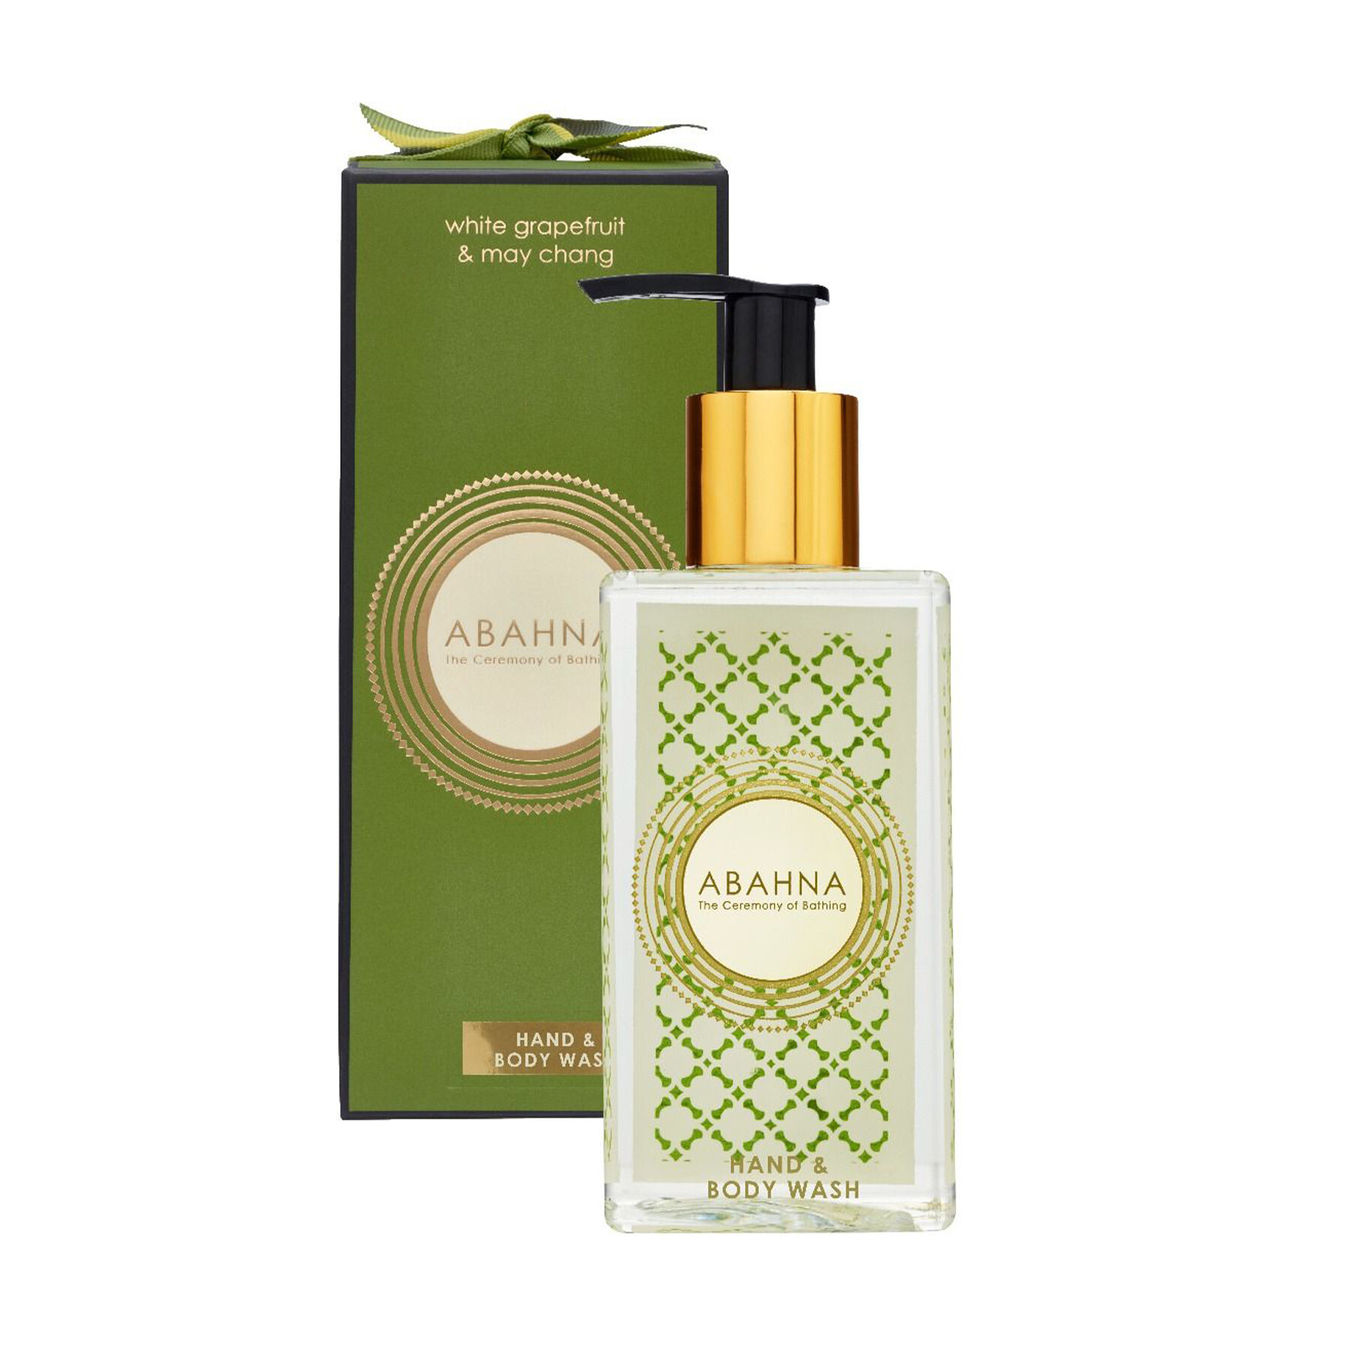 ABAHNA White Grapefruit & May Chang Hand & Body Lotion